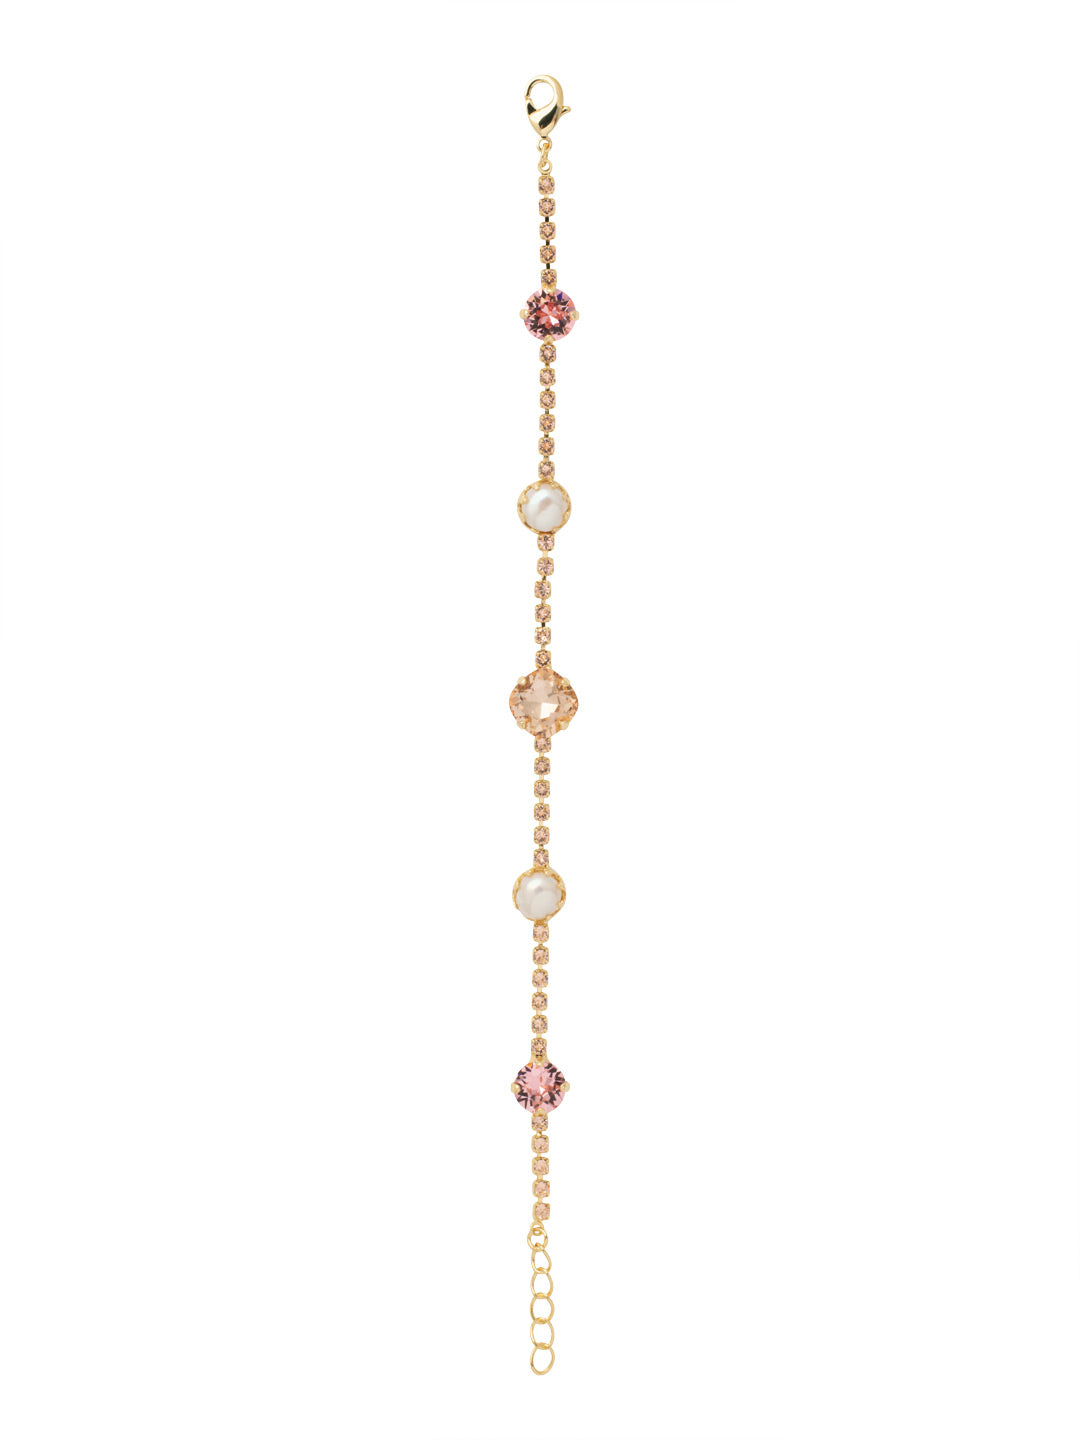 Caterina Tennis Bracelet - BES11BGFSK - <p>The Caterina Tennis Bracelet is a stylishly symmetrical piece, dotted with fashionable freshwater pearls and an iredescent crystal at its center. From Sorrelli's First Kiss collection in our Bright Gold-tone finish.</p>